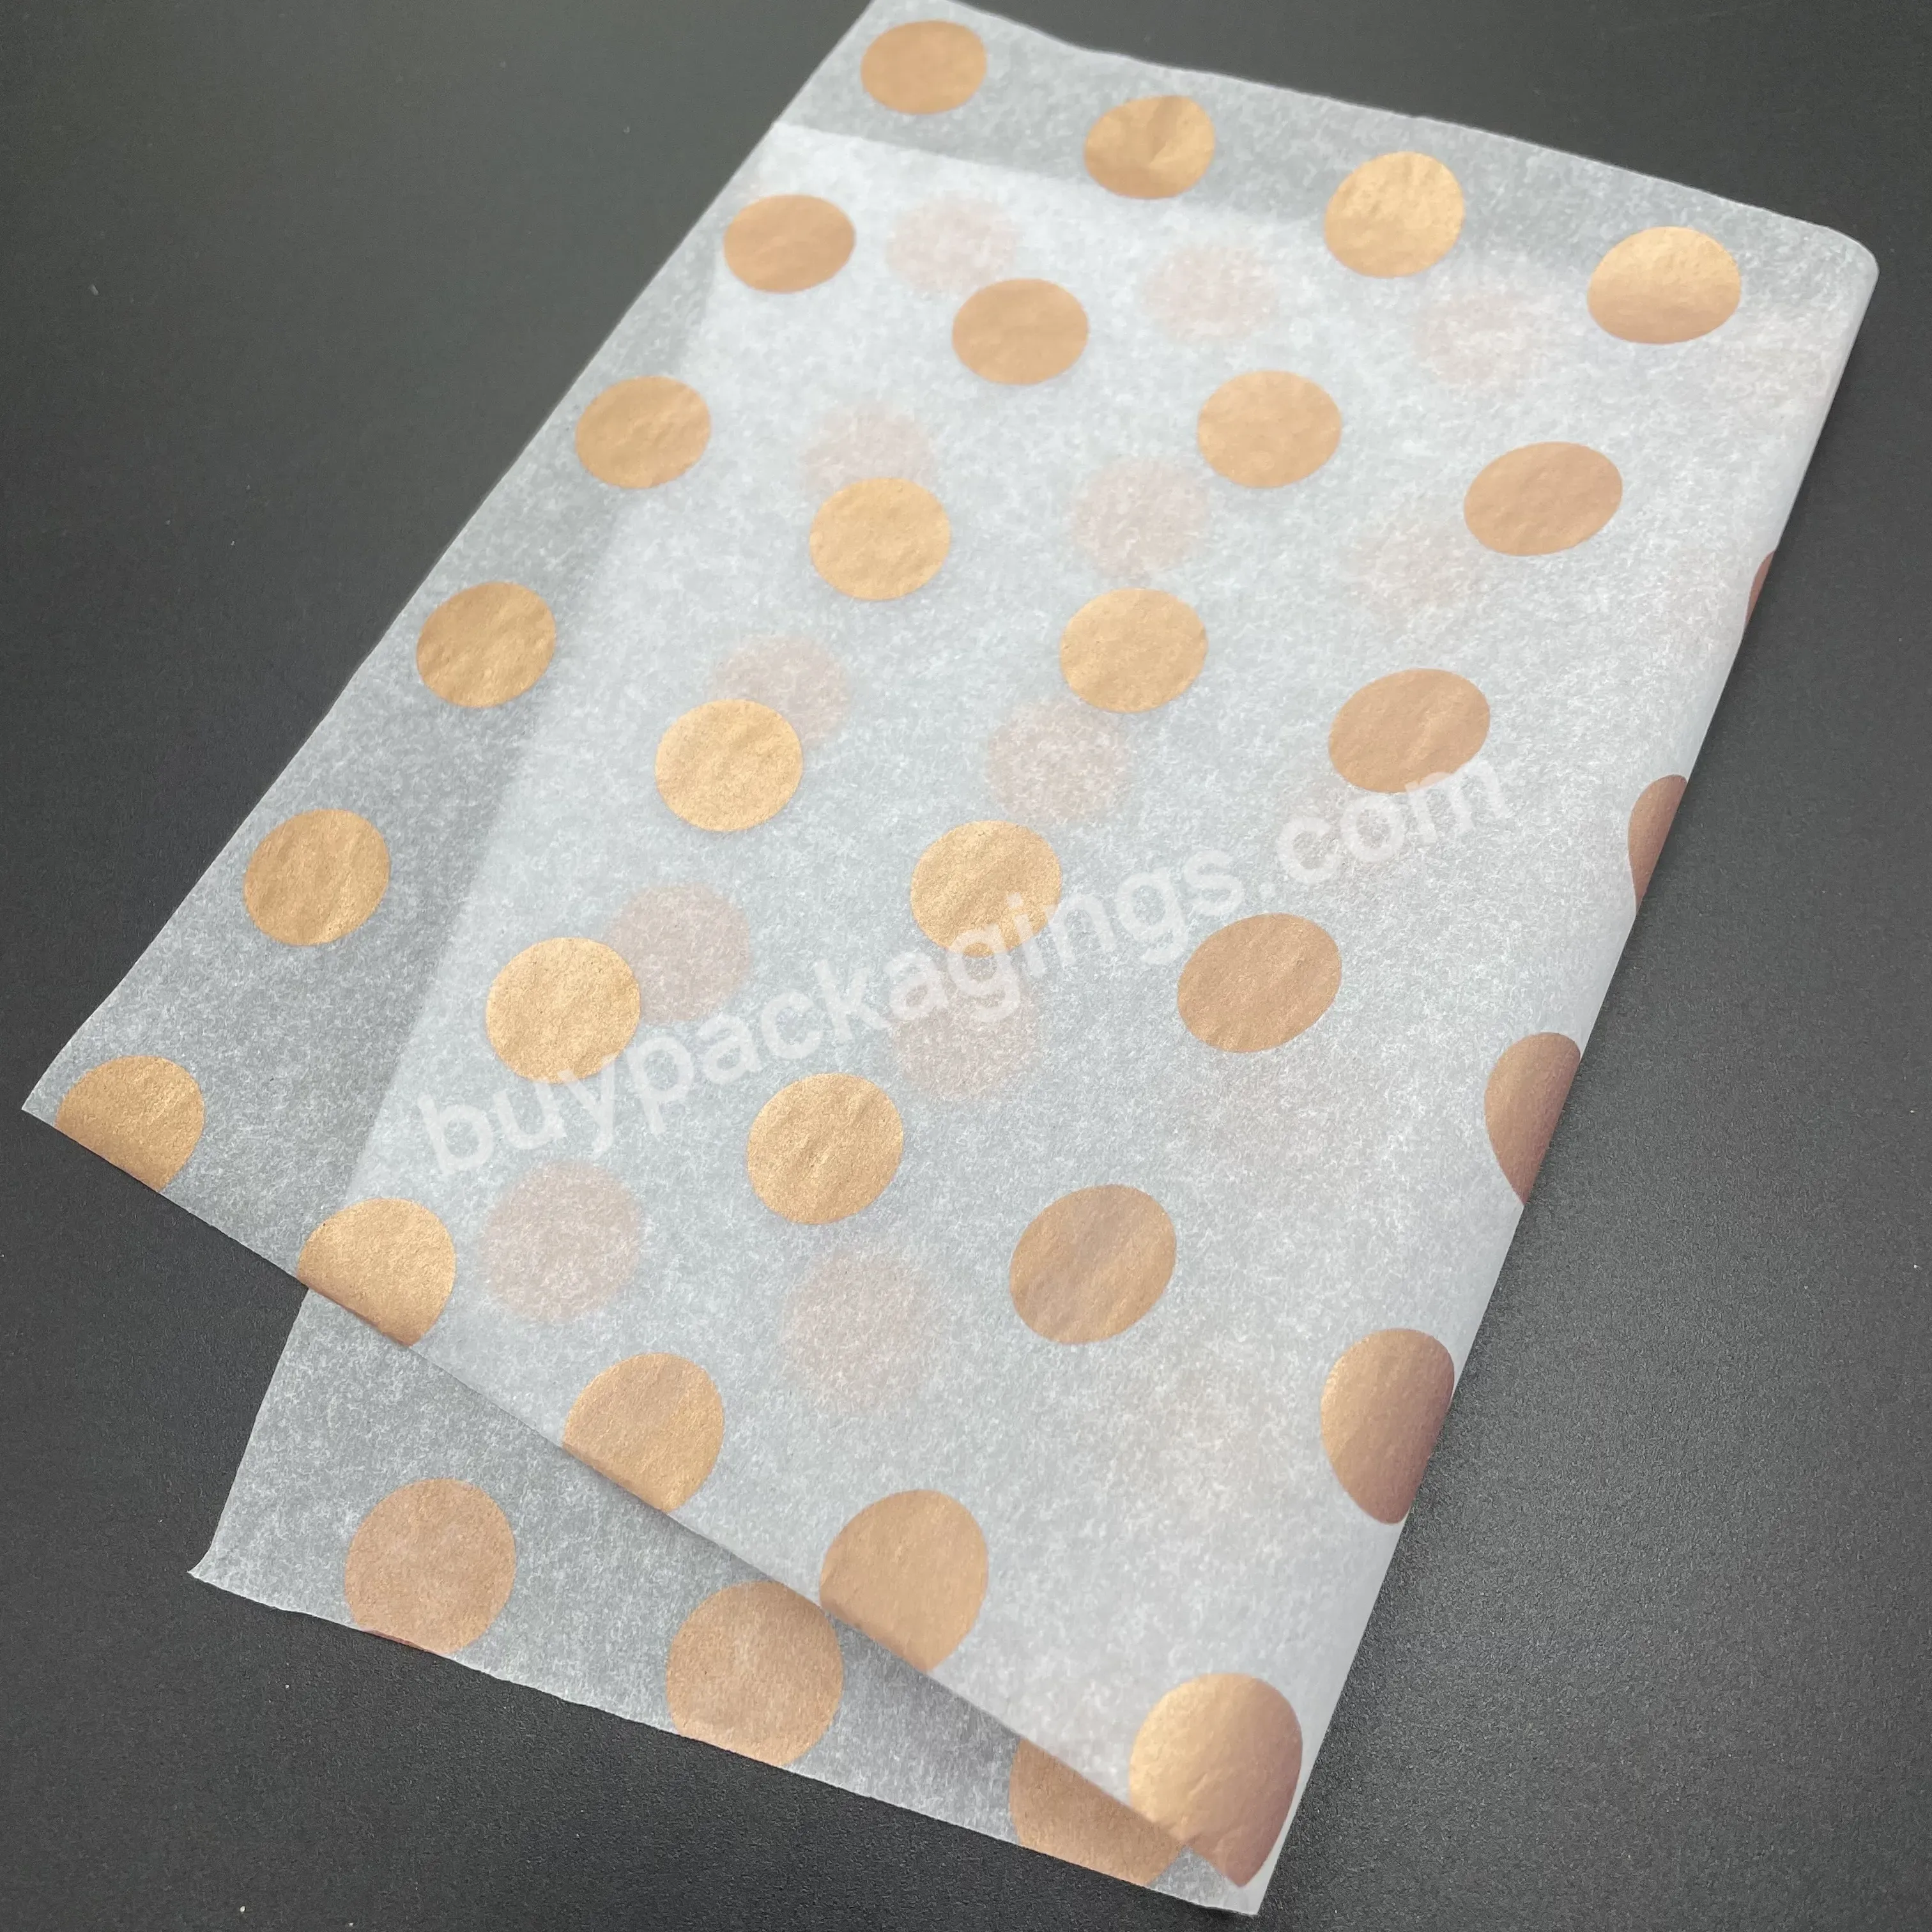 17g Acid Free White Tissue Paper With Metallic Rose Gold Color Circle Printed Logo Wrapping Paper/mf Acid Free Tissue Paper - Buy Mf Acid Free Tissue Paper,Metallic Gold Color Tissue Paper,Acid Free Tissue Paper.